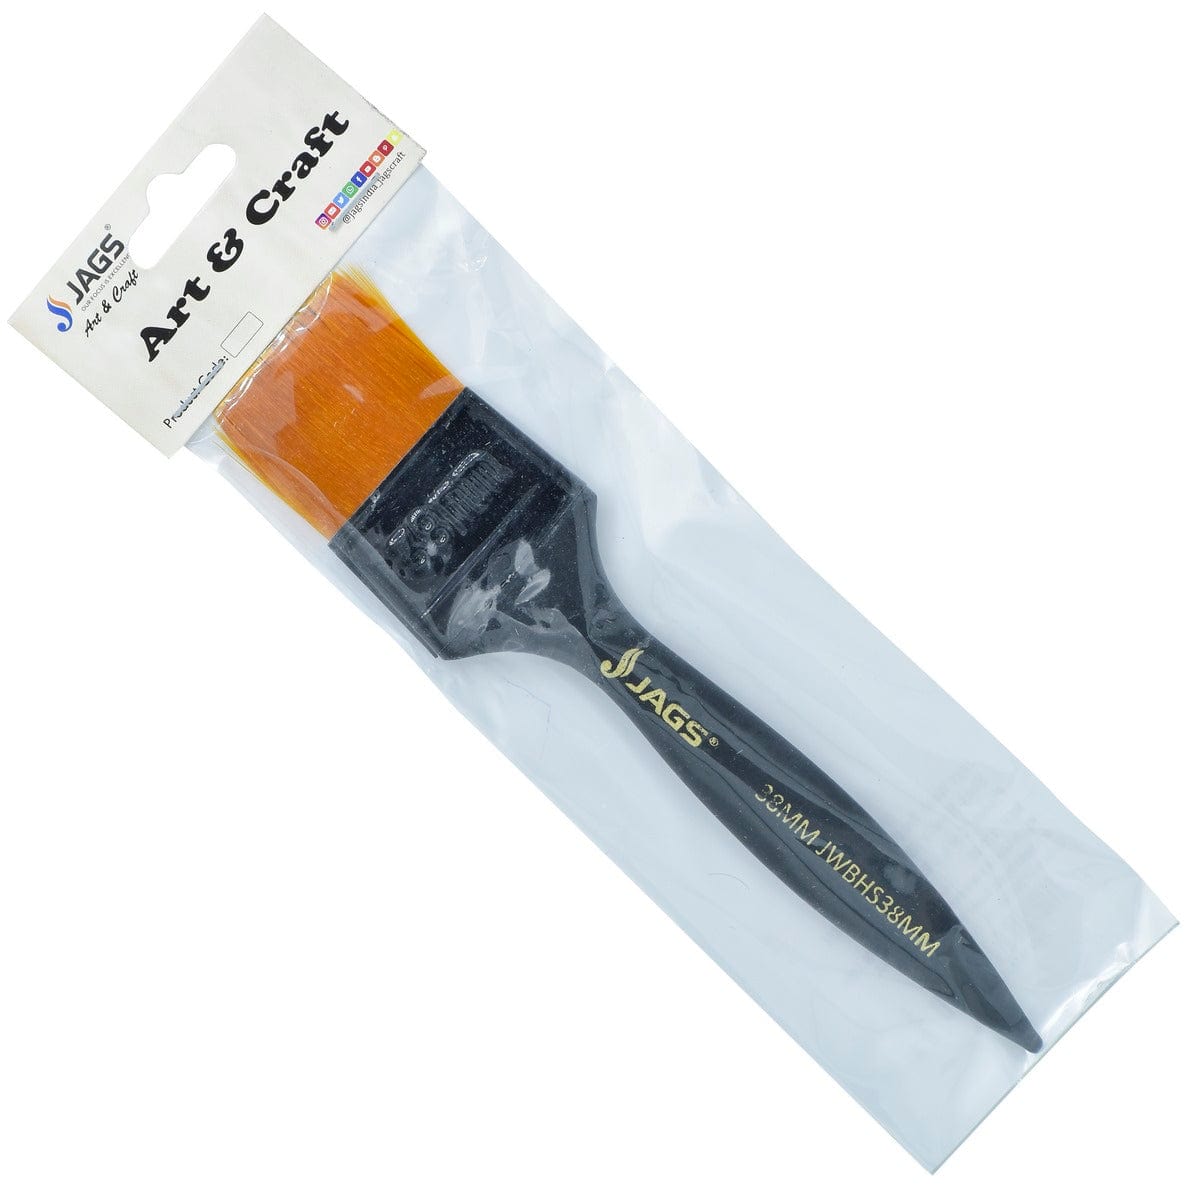 jags-mumbai Tools Jags Wash Brush Synthetic Hair Black Handle 38MM - Premium Cleaning Tool for Effortless Shine